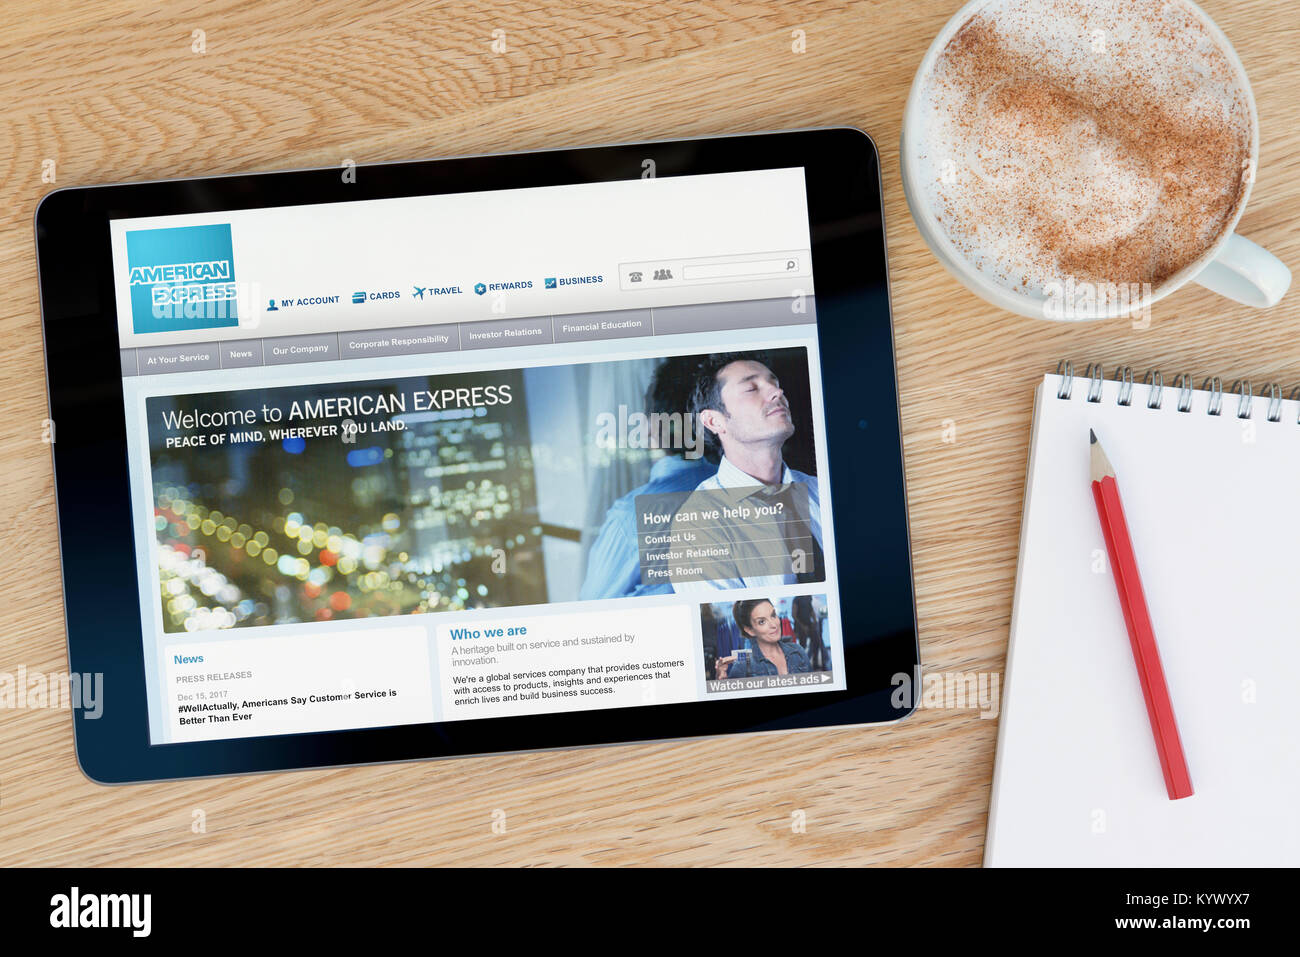 The American Express website on an iPad tablet, on a wooden table beside a notepad, pencil and cup of coffee (Editorial only) Stock Photo